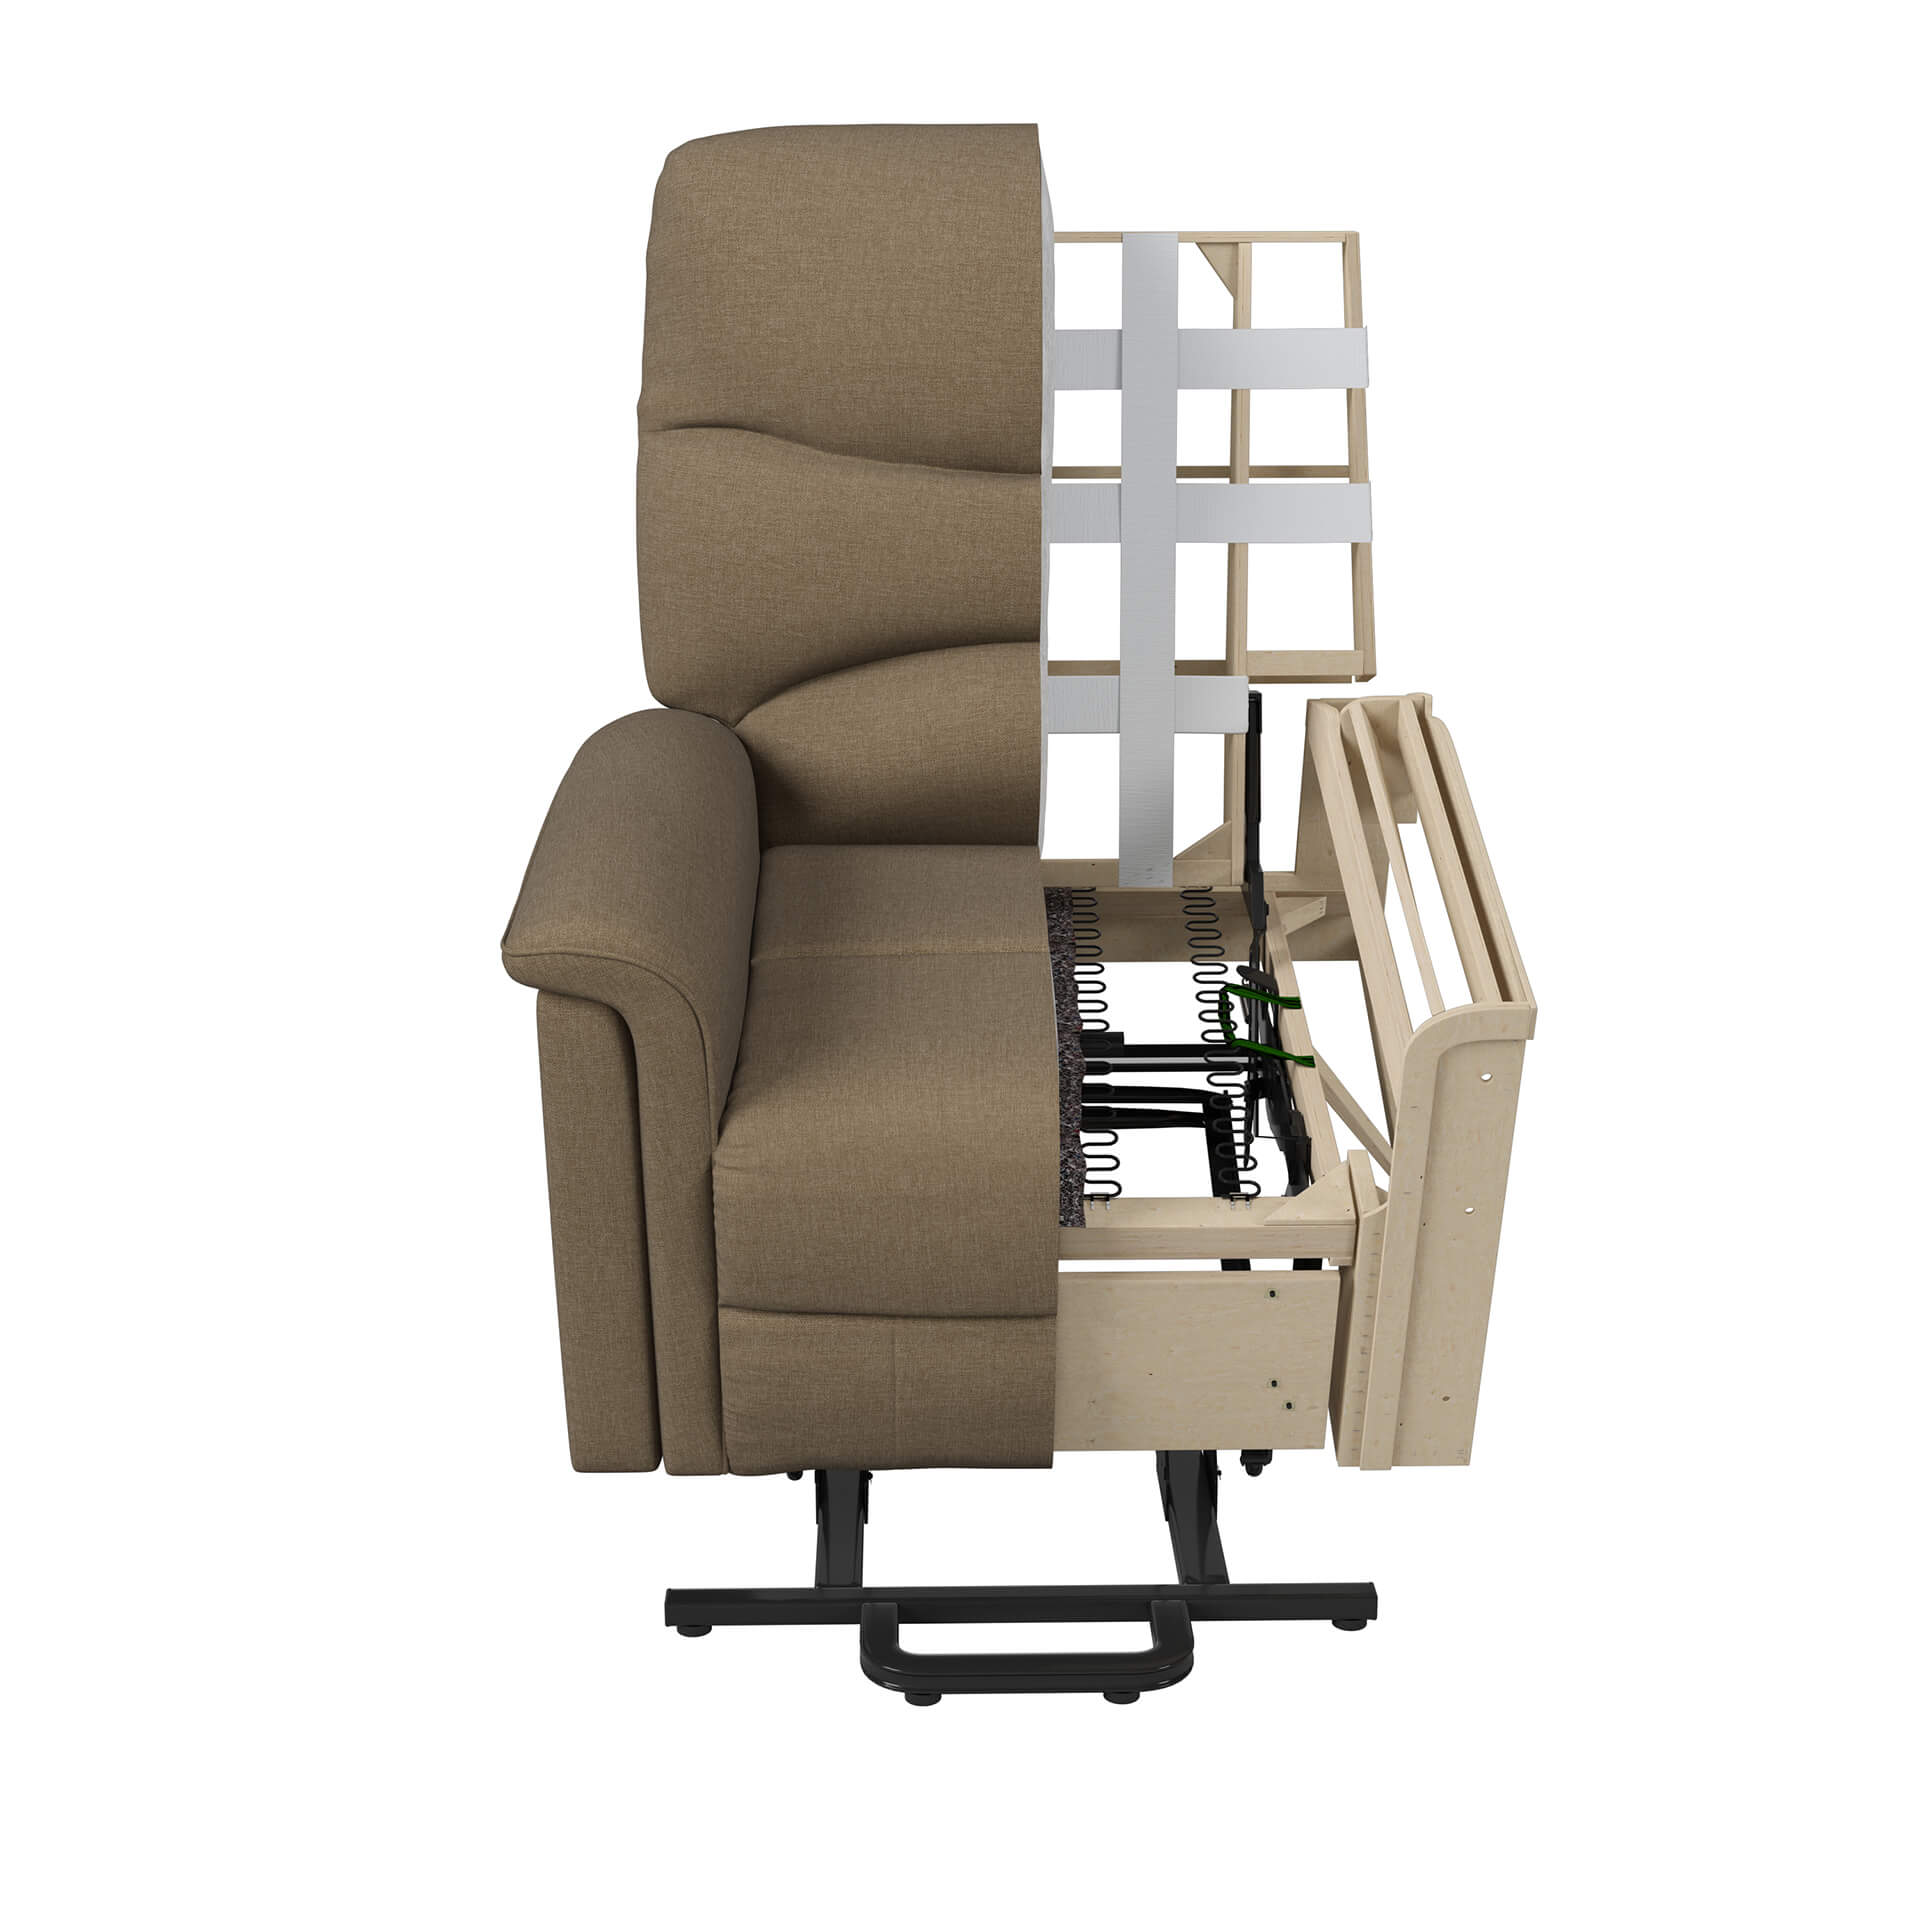 Cut-Out 3D Render of Upholstered Chair